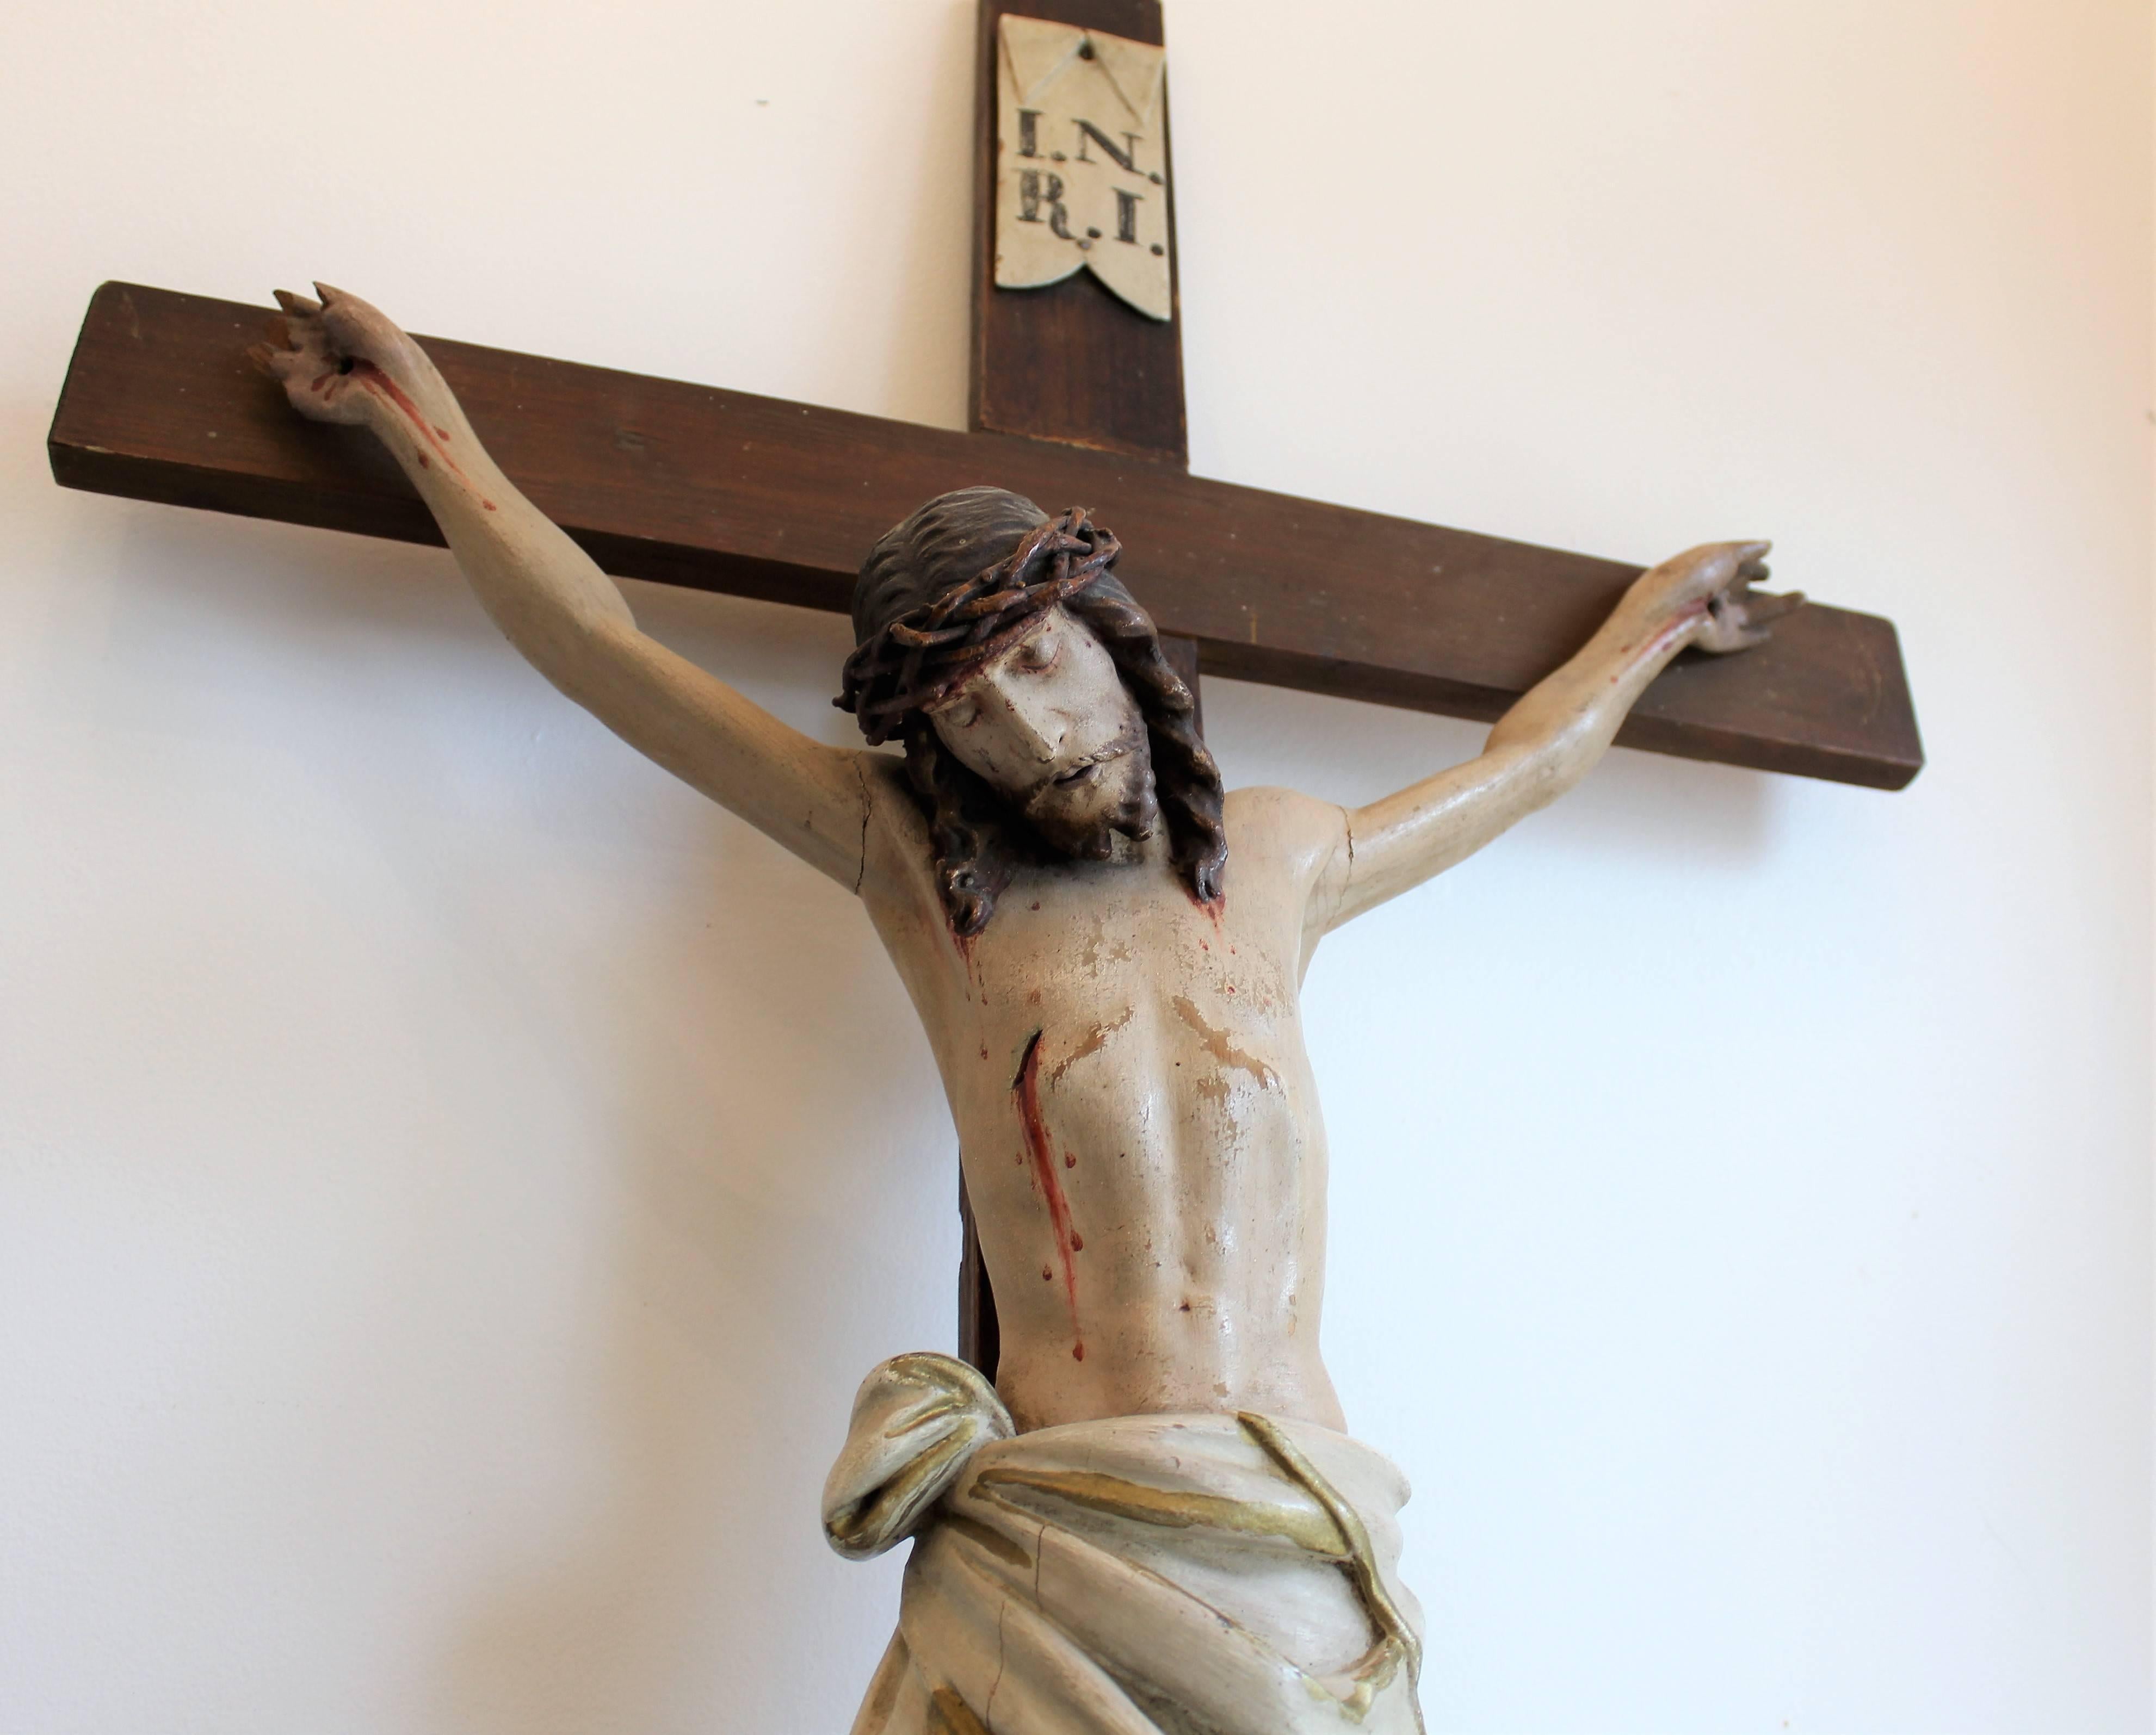 Early 19th century European hand-carved and polychromed wood crucifix.